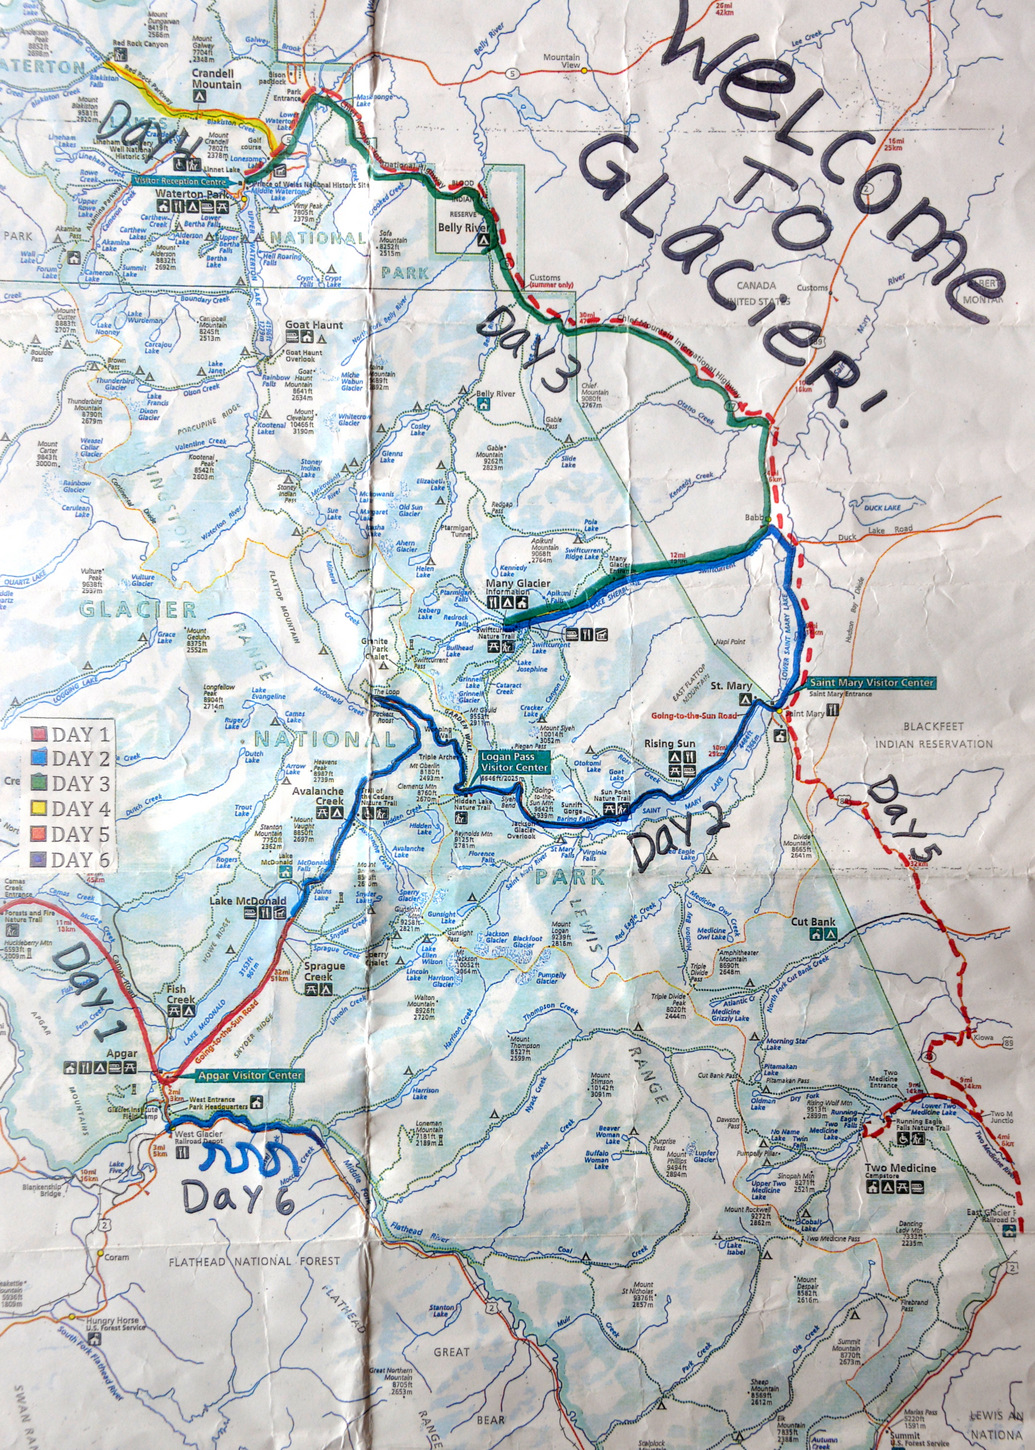 A very used Map of Glacier National Park (Montana, USA) and Waterton Lakes National Park (Alberta, Canada) as issued by Backroads Travel Co.